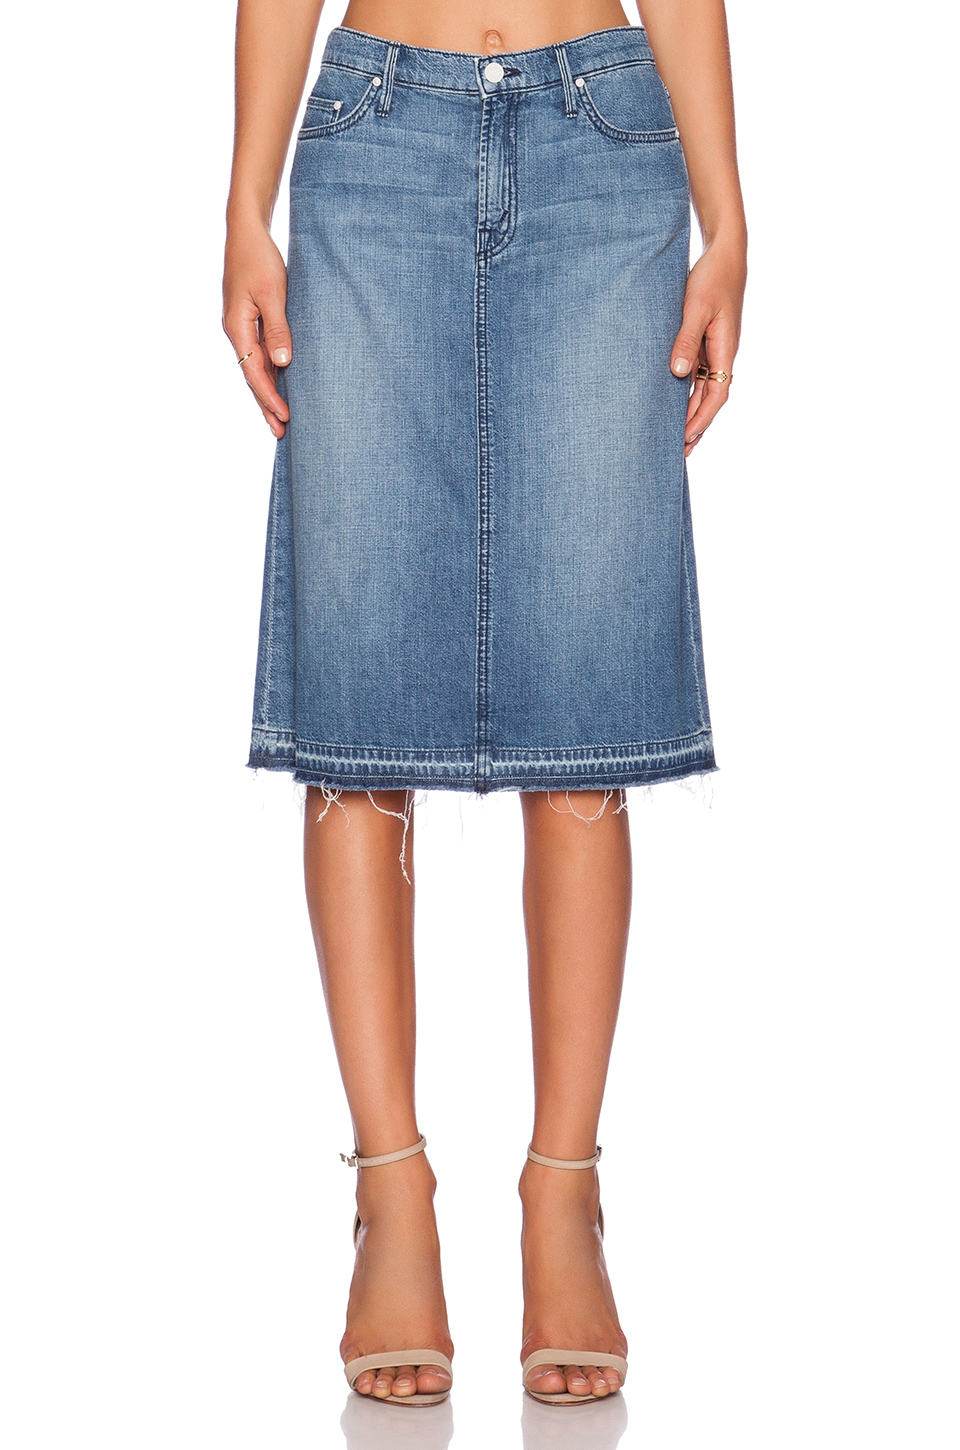 Lyst - Mother The Dropout Skirt in Blue